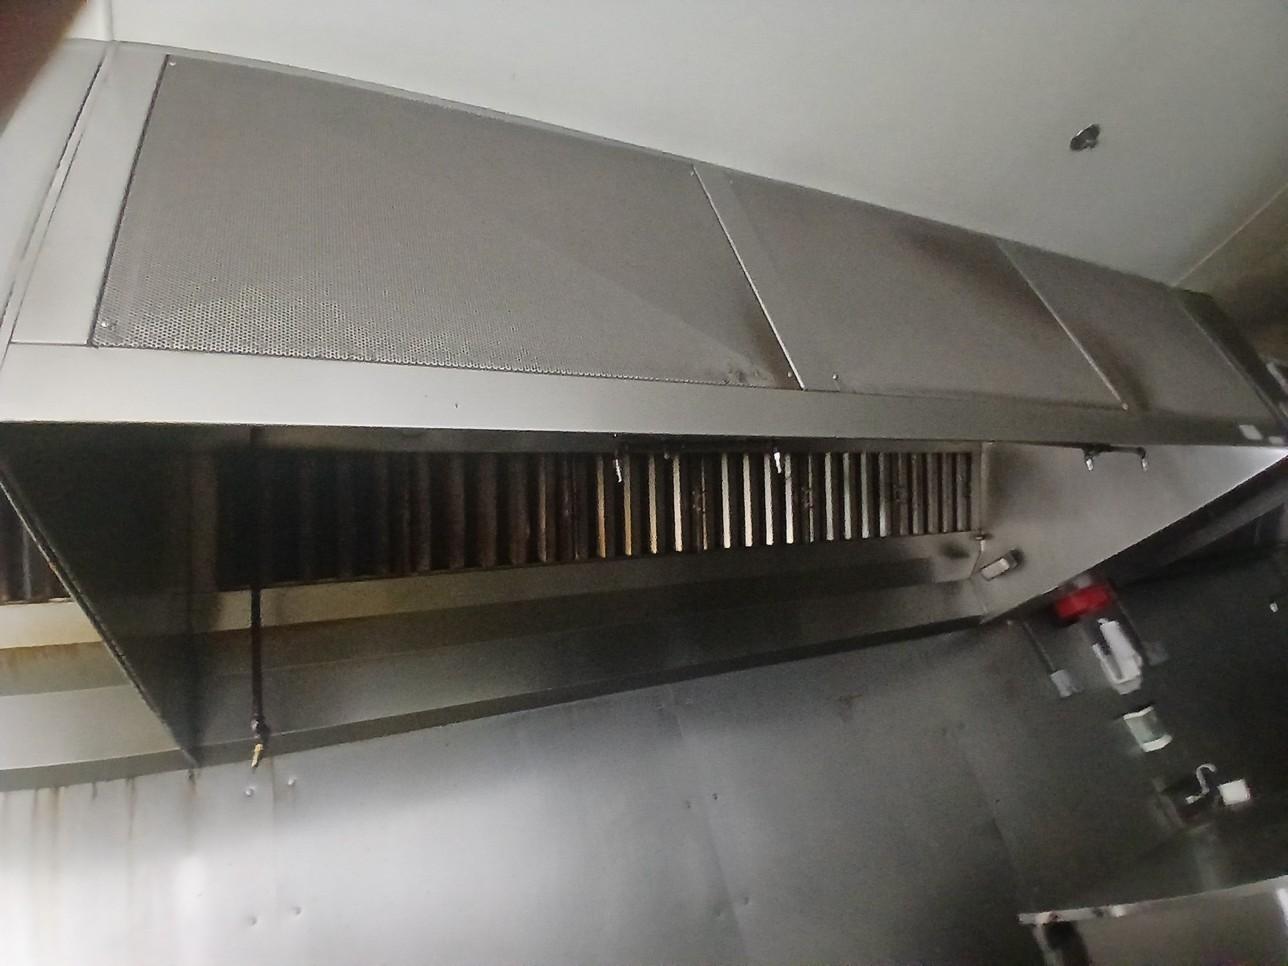 12' Stainless Steel Hood System W/ Ansul System - Make Up Air & Fan - Please see pics for additional